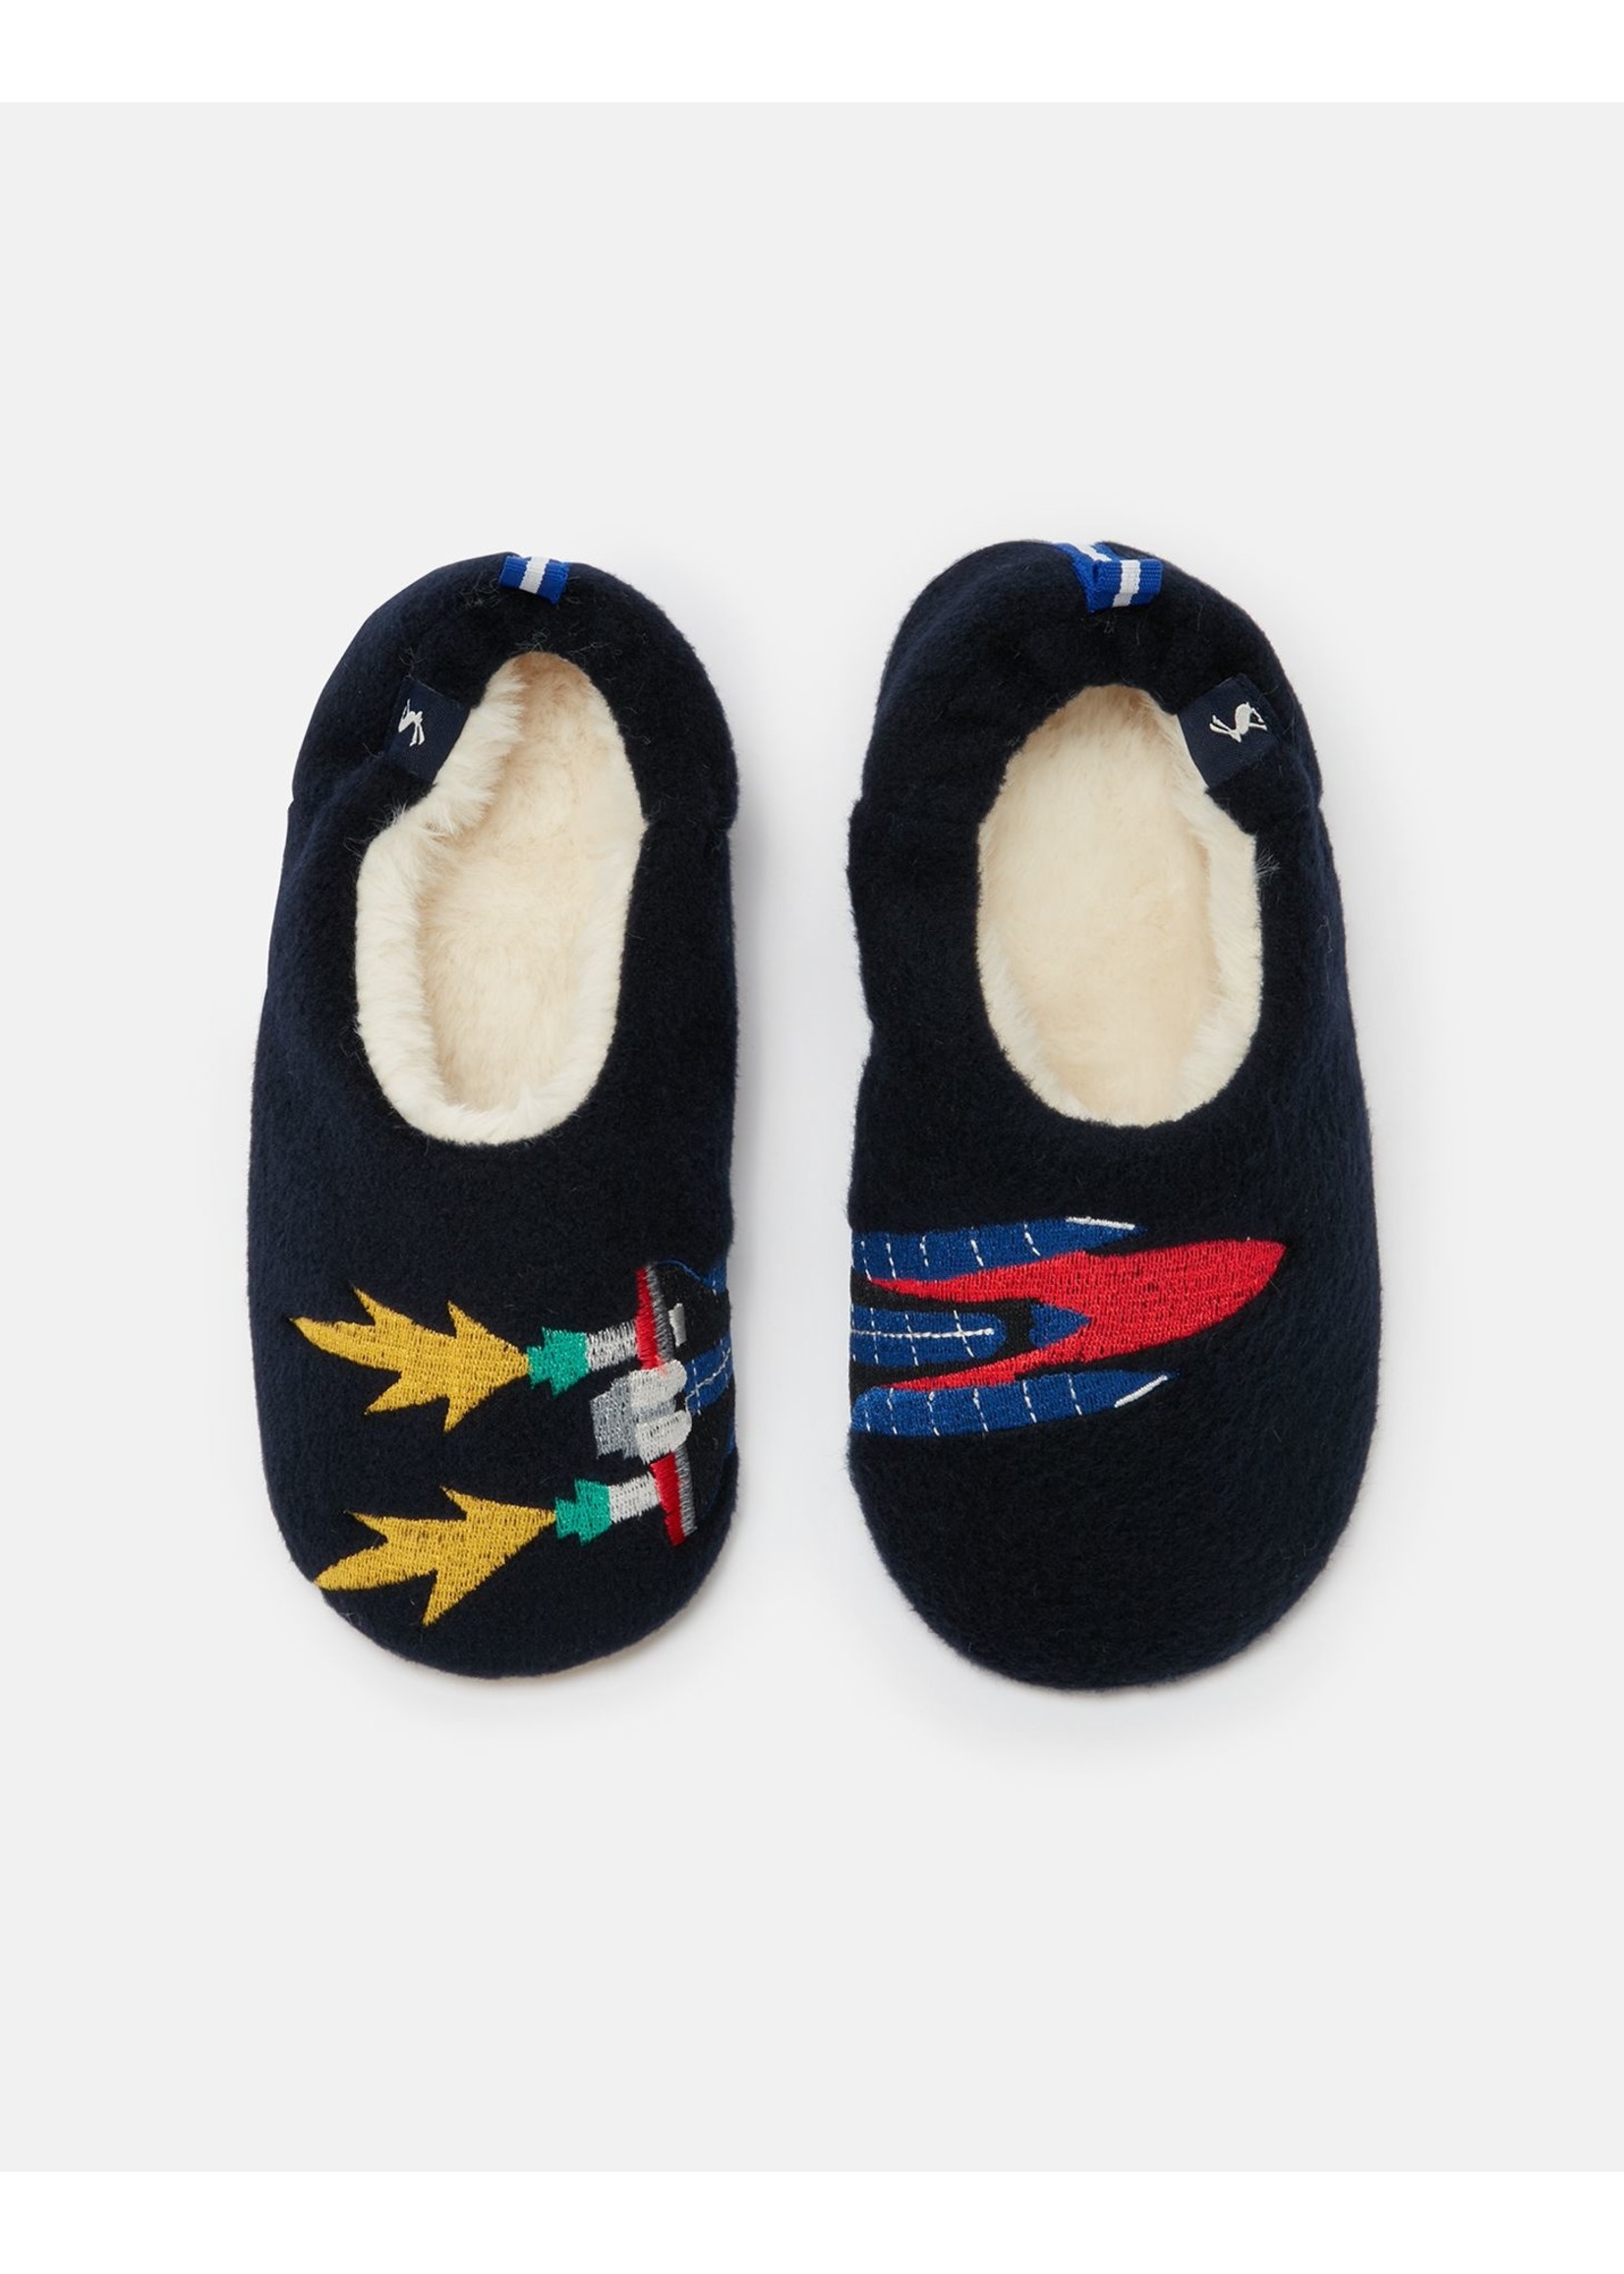 Joules Joules Boys Rocket Slippers